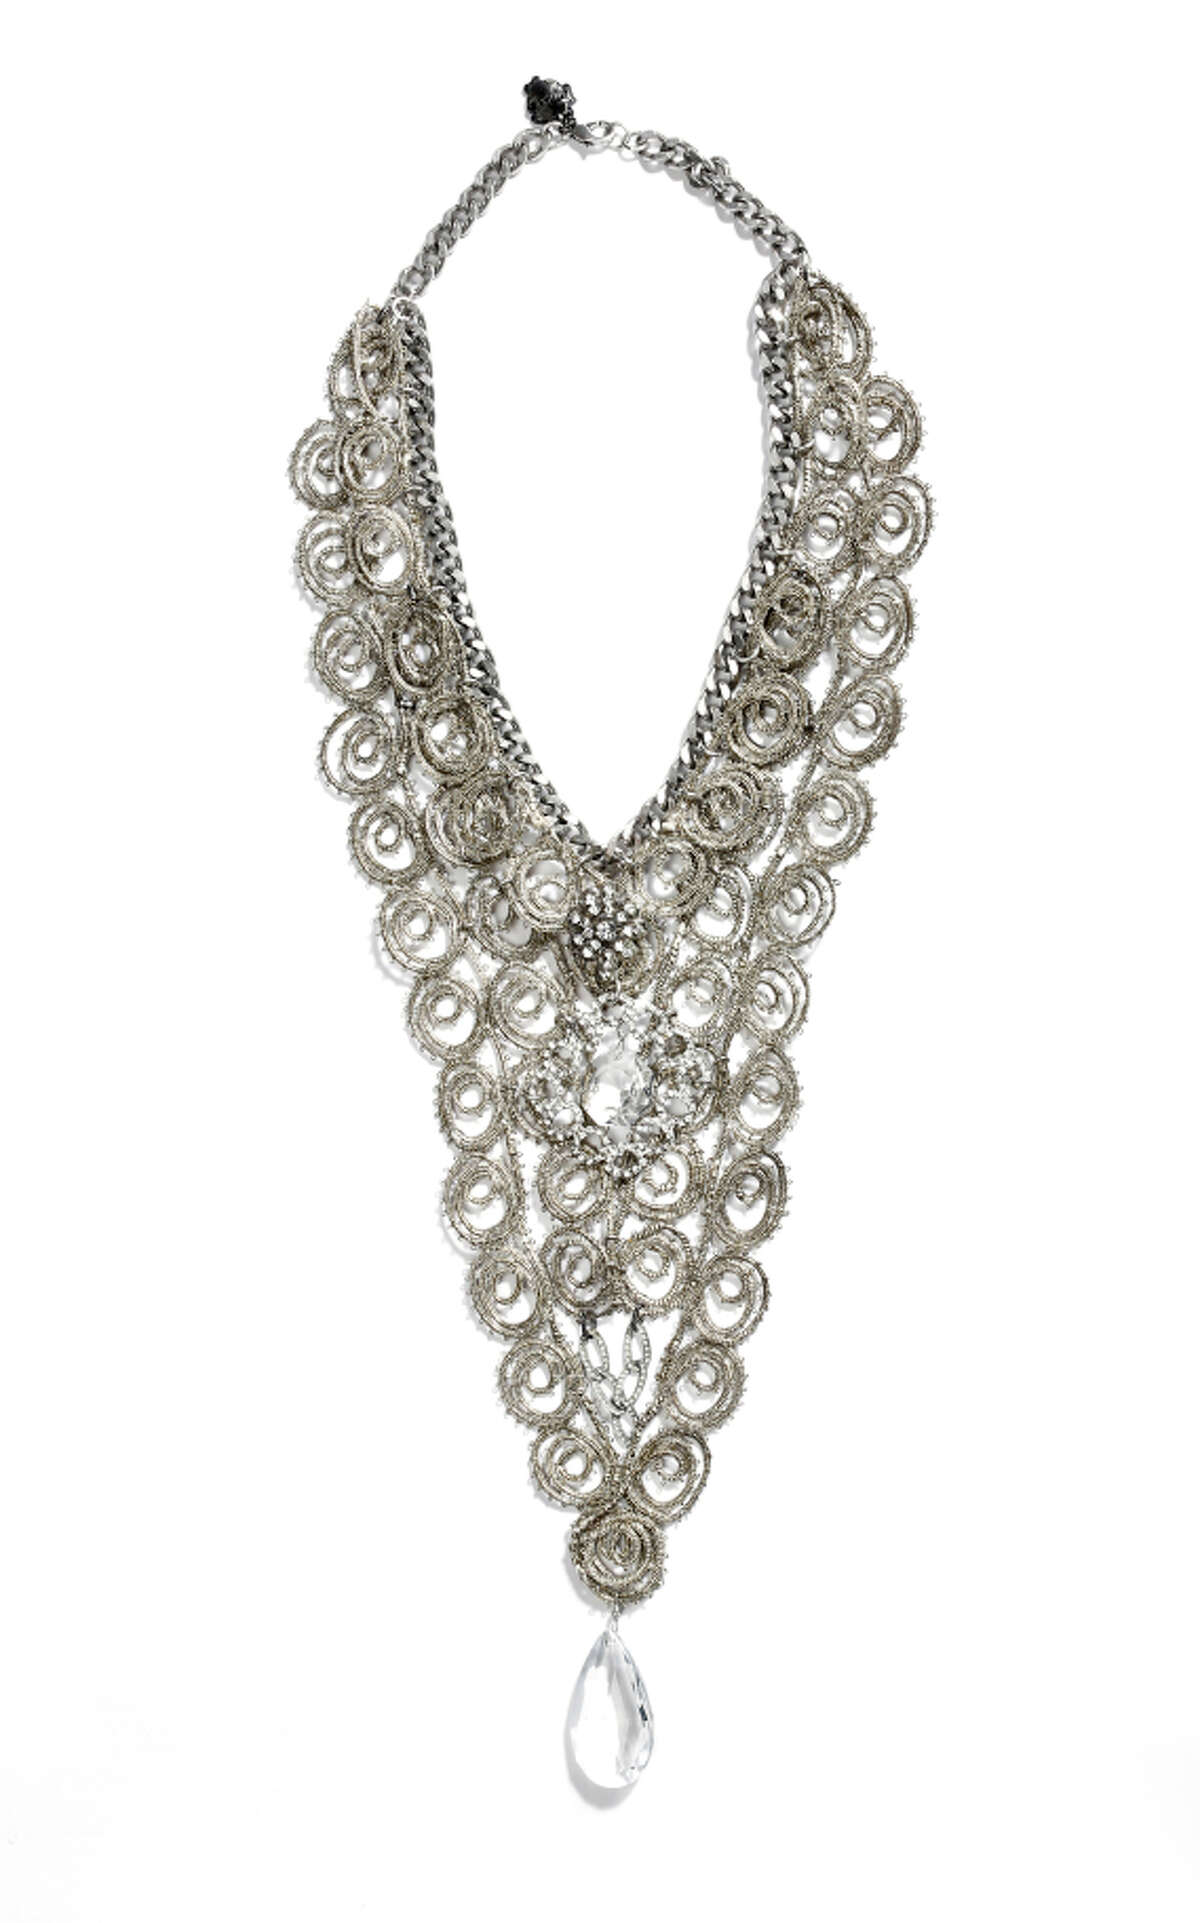 Wish List: Bedazzle at the ball in antique lace neckwear